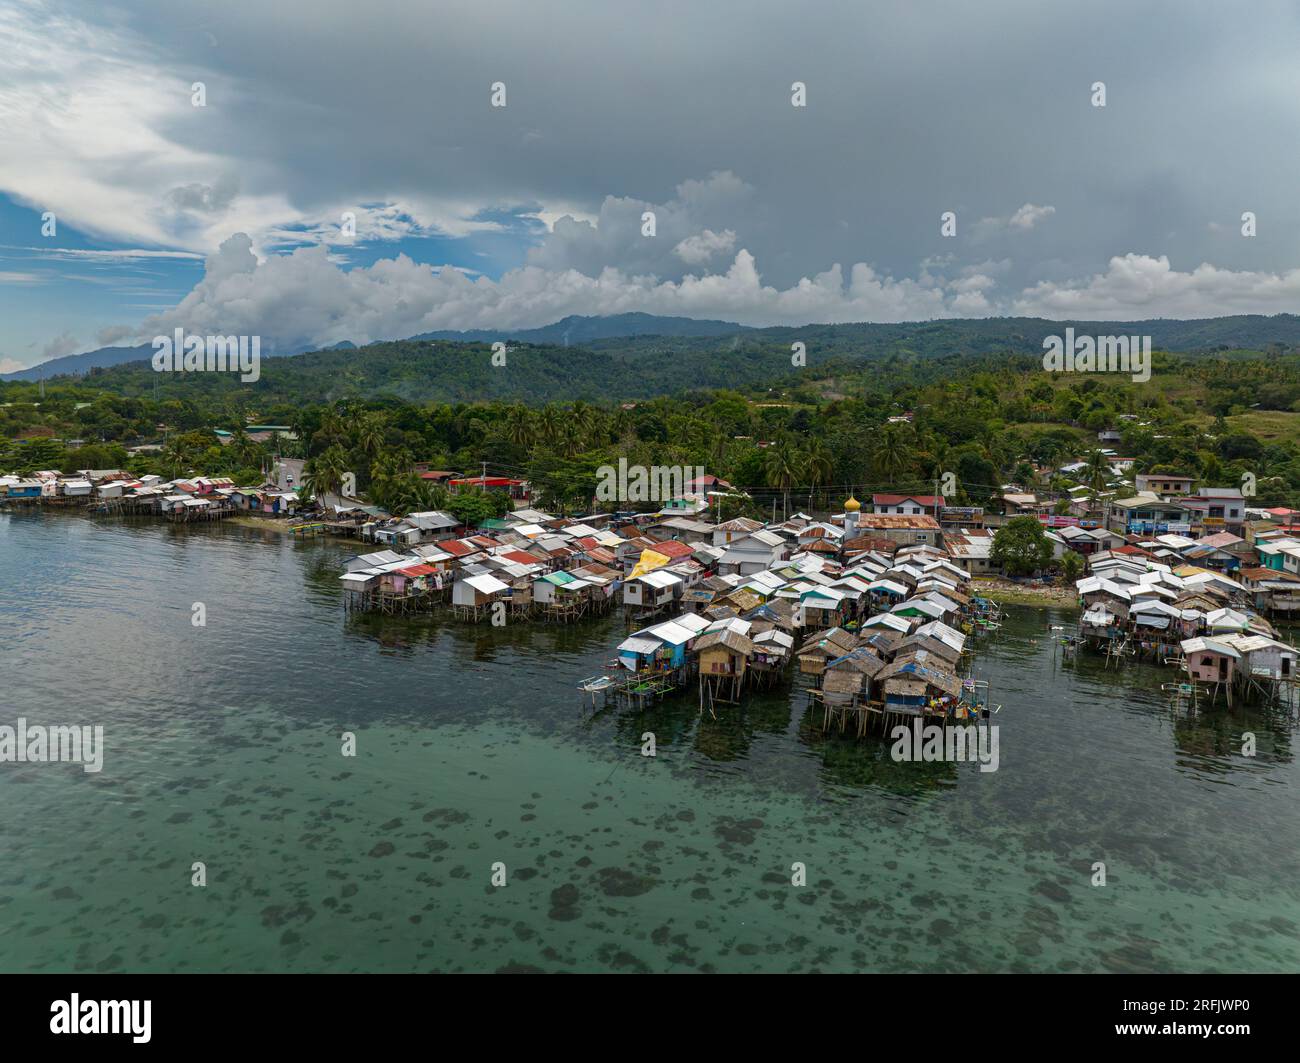 Village of fishermen with wooden houses on the water, with fishing boats. Zamboanga. Philippines, Mindanao. Stock Photo